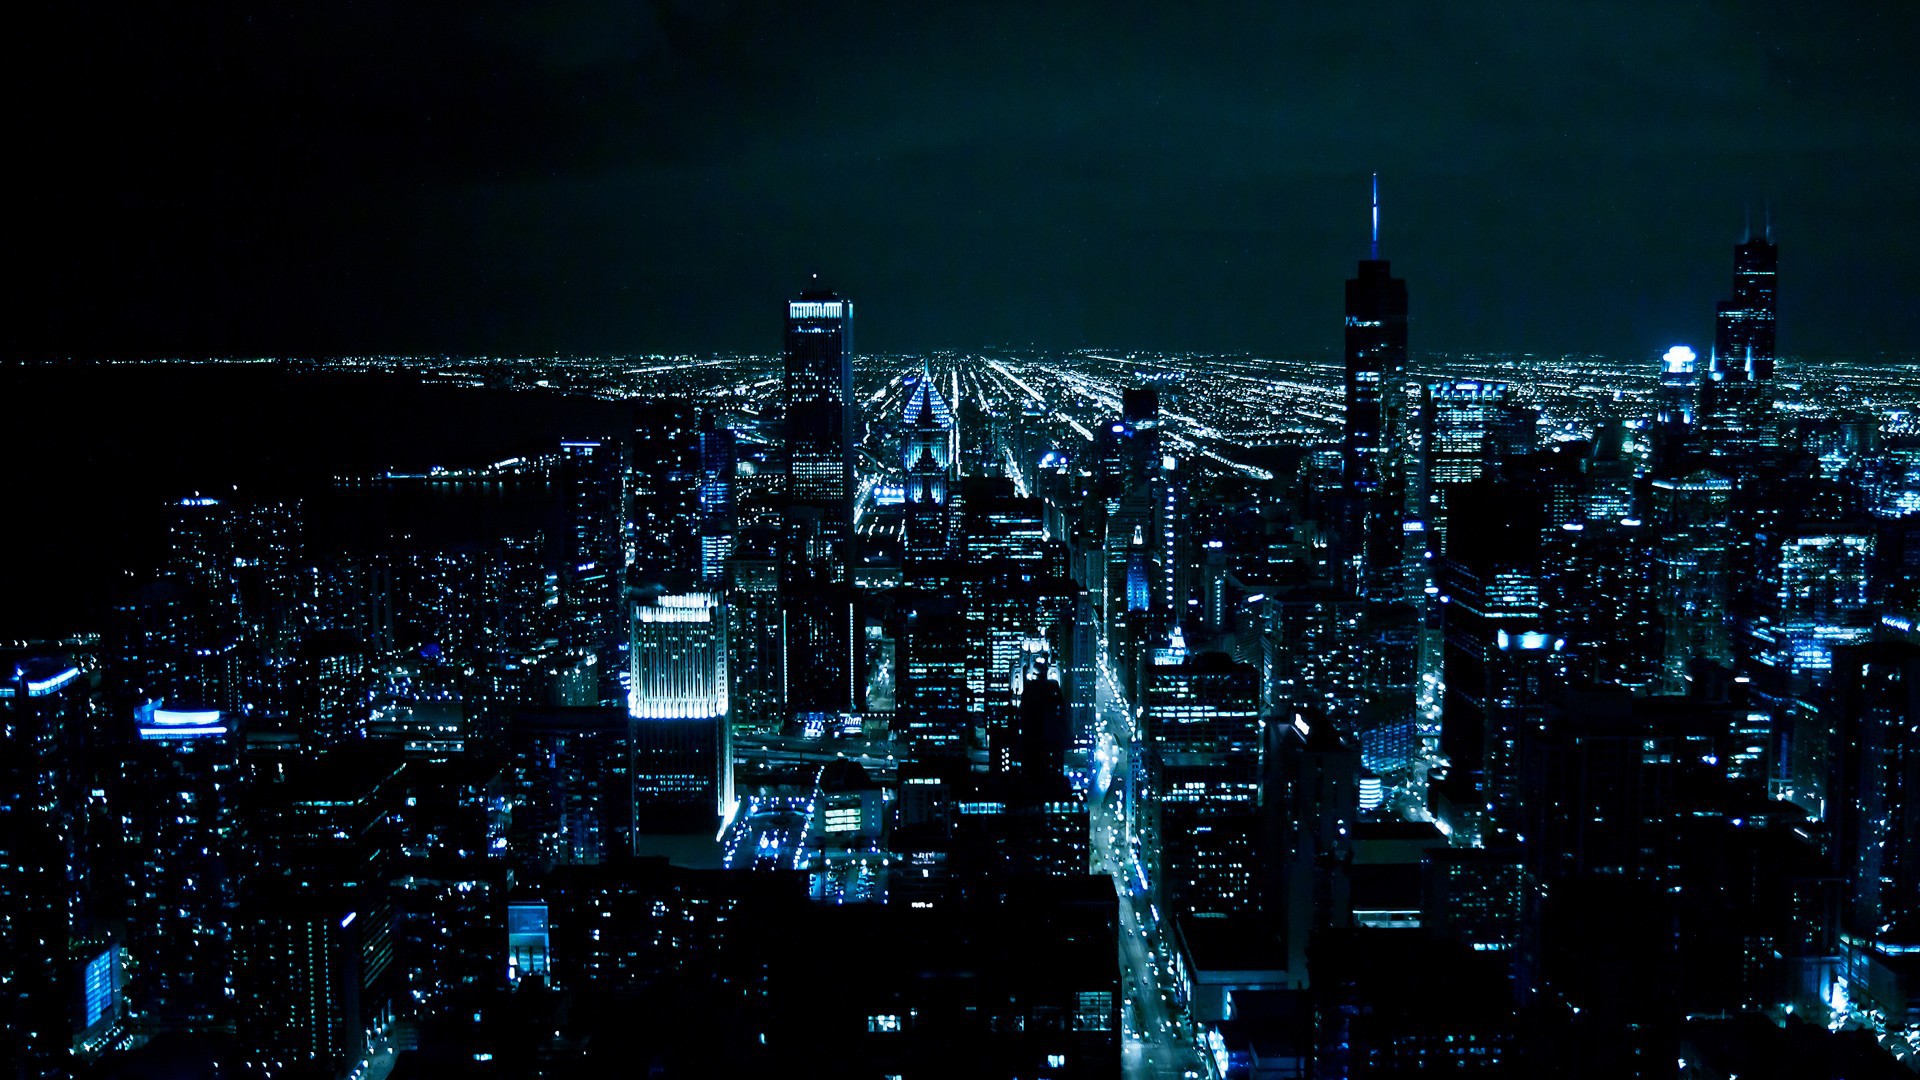 Night Night city Chicago Skyscraper wallpapers and images 1920x1080